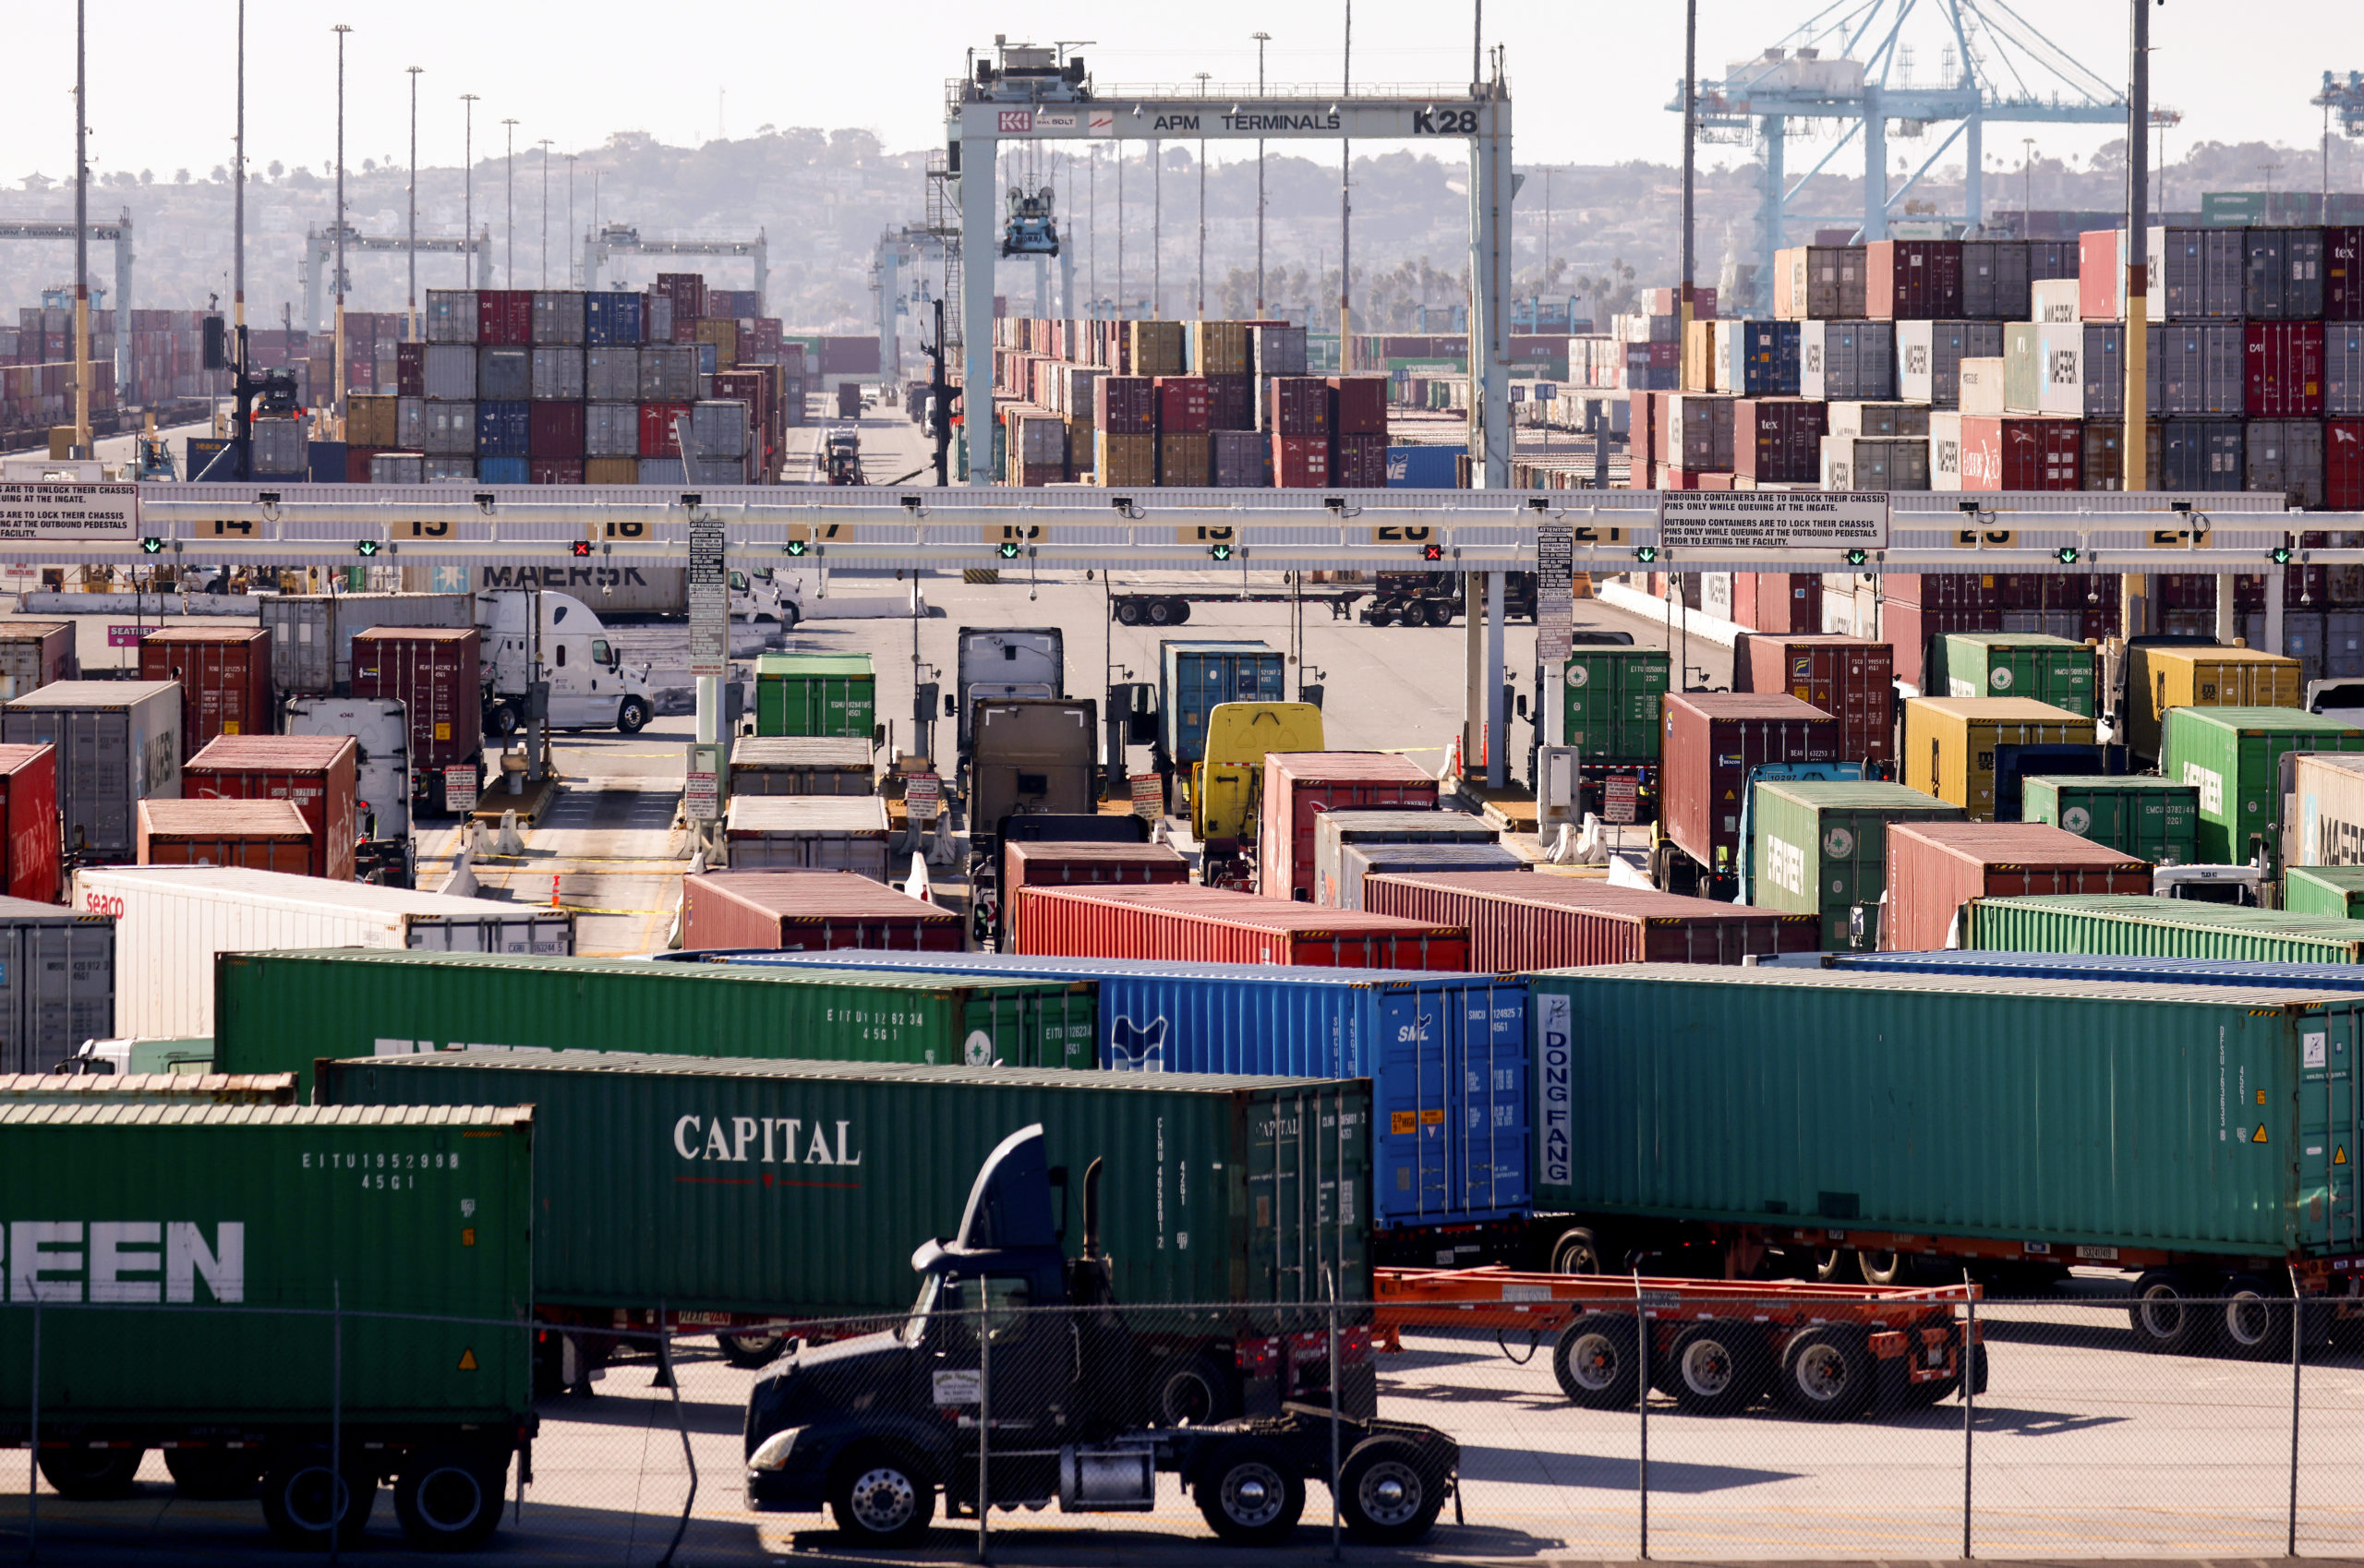 Trucks haul shipping containers at the Port of Los Angeles on November 24, 2021 in San Pedro, California. (Photo by Mario Tama/Getty Images)